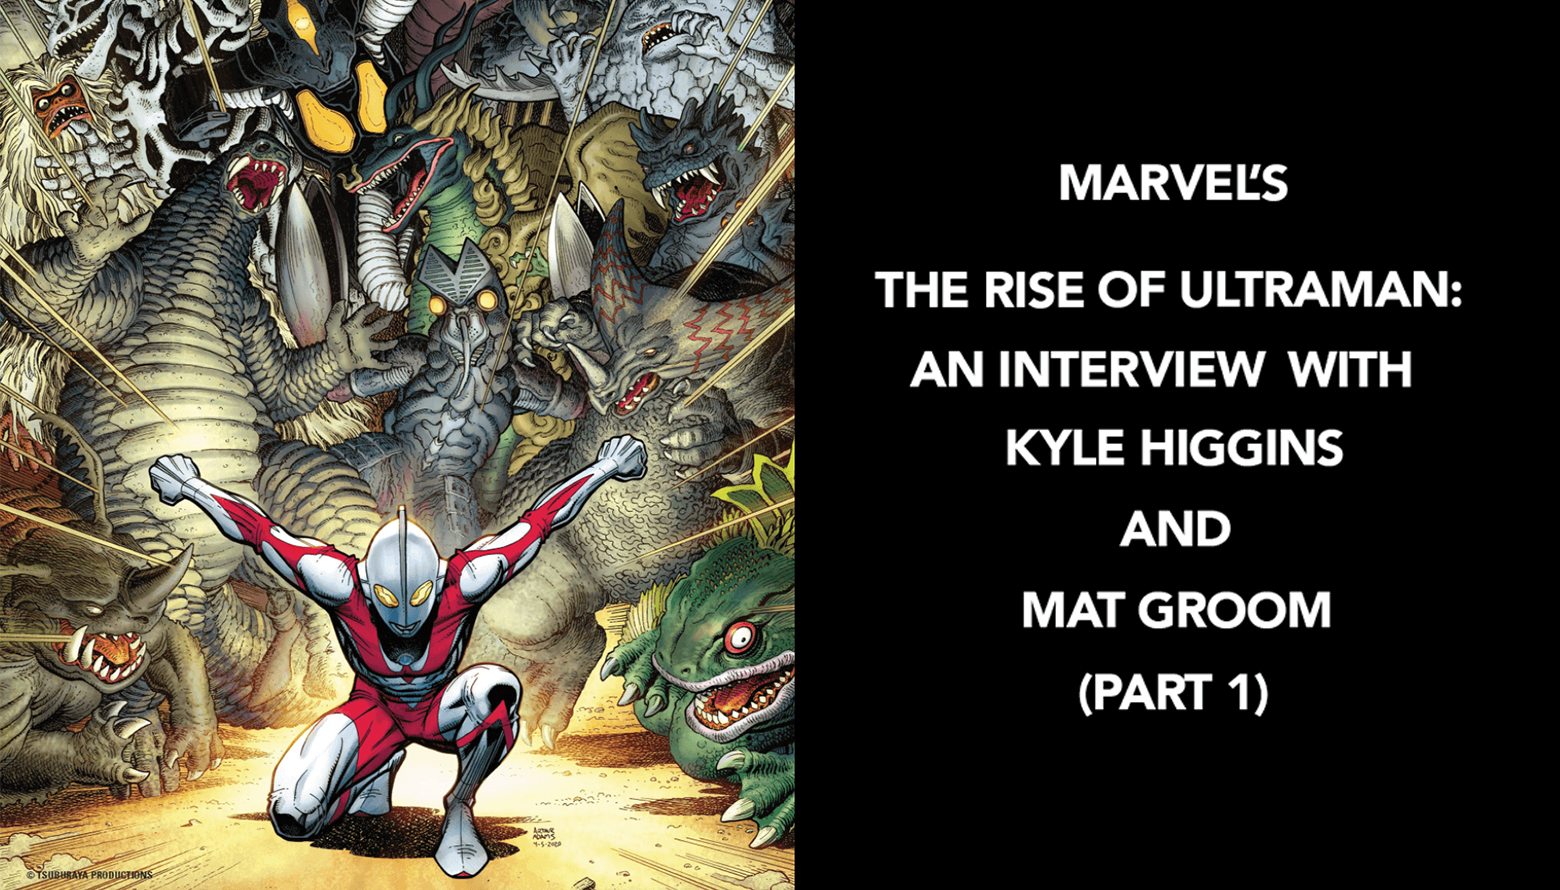 MARVEL’S THE RISE OF ULTRAMAN:AN INTERVIEW WITH KYLE HIGGINS AND MAT GROOM (PART 1)